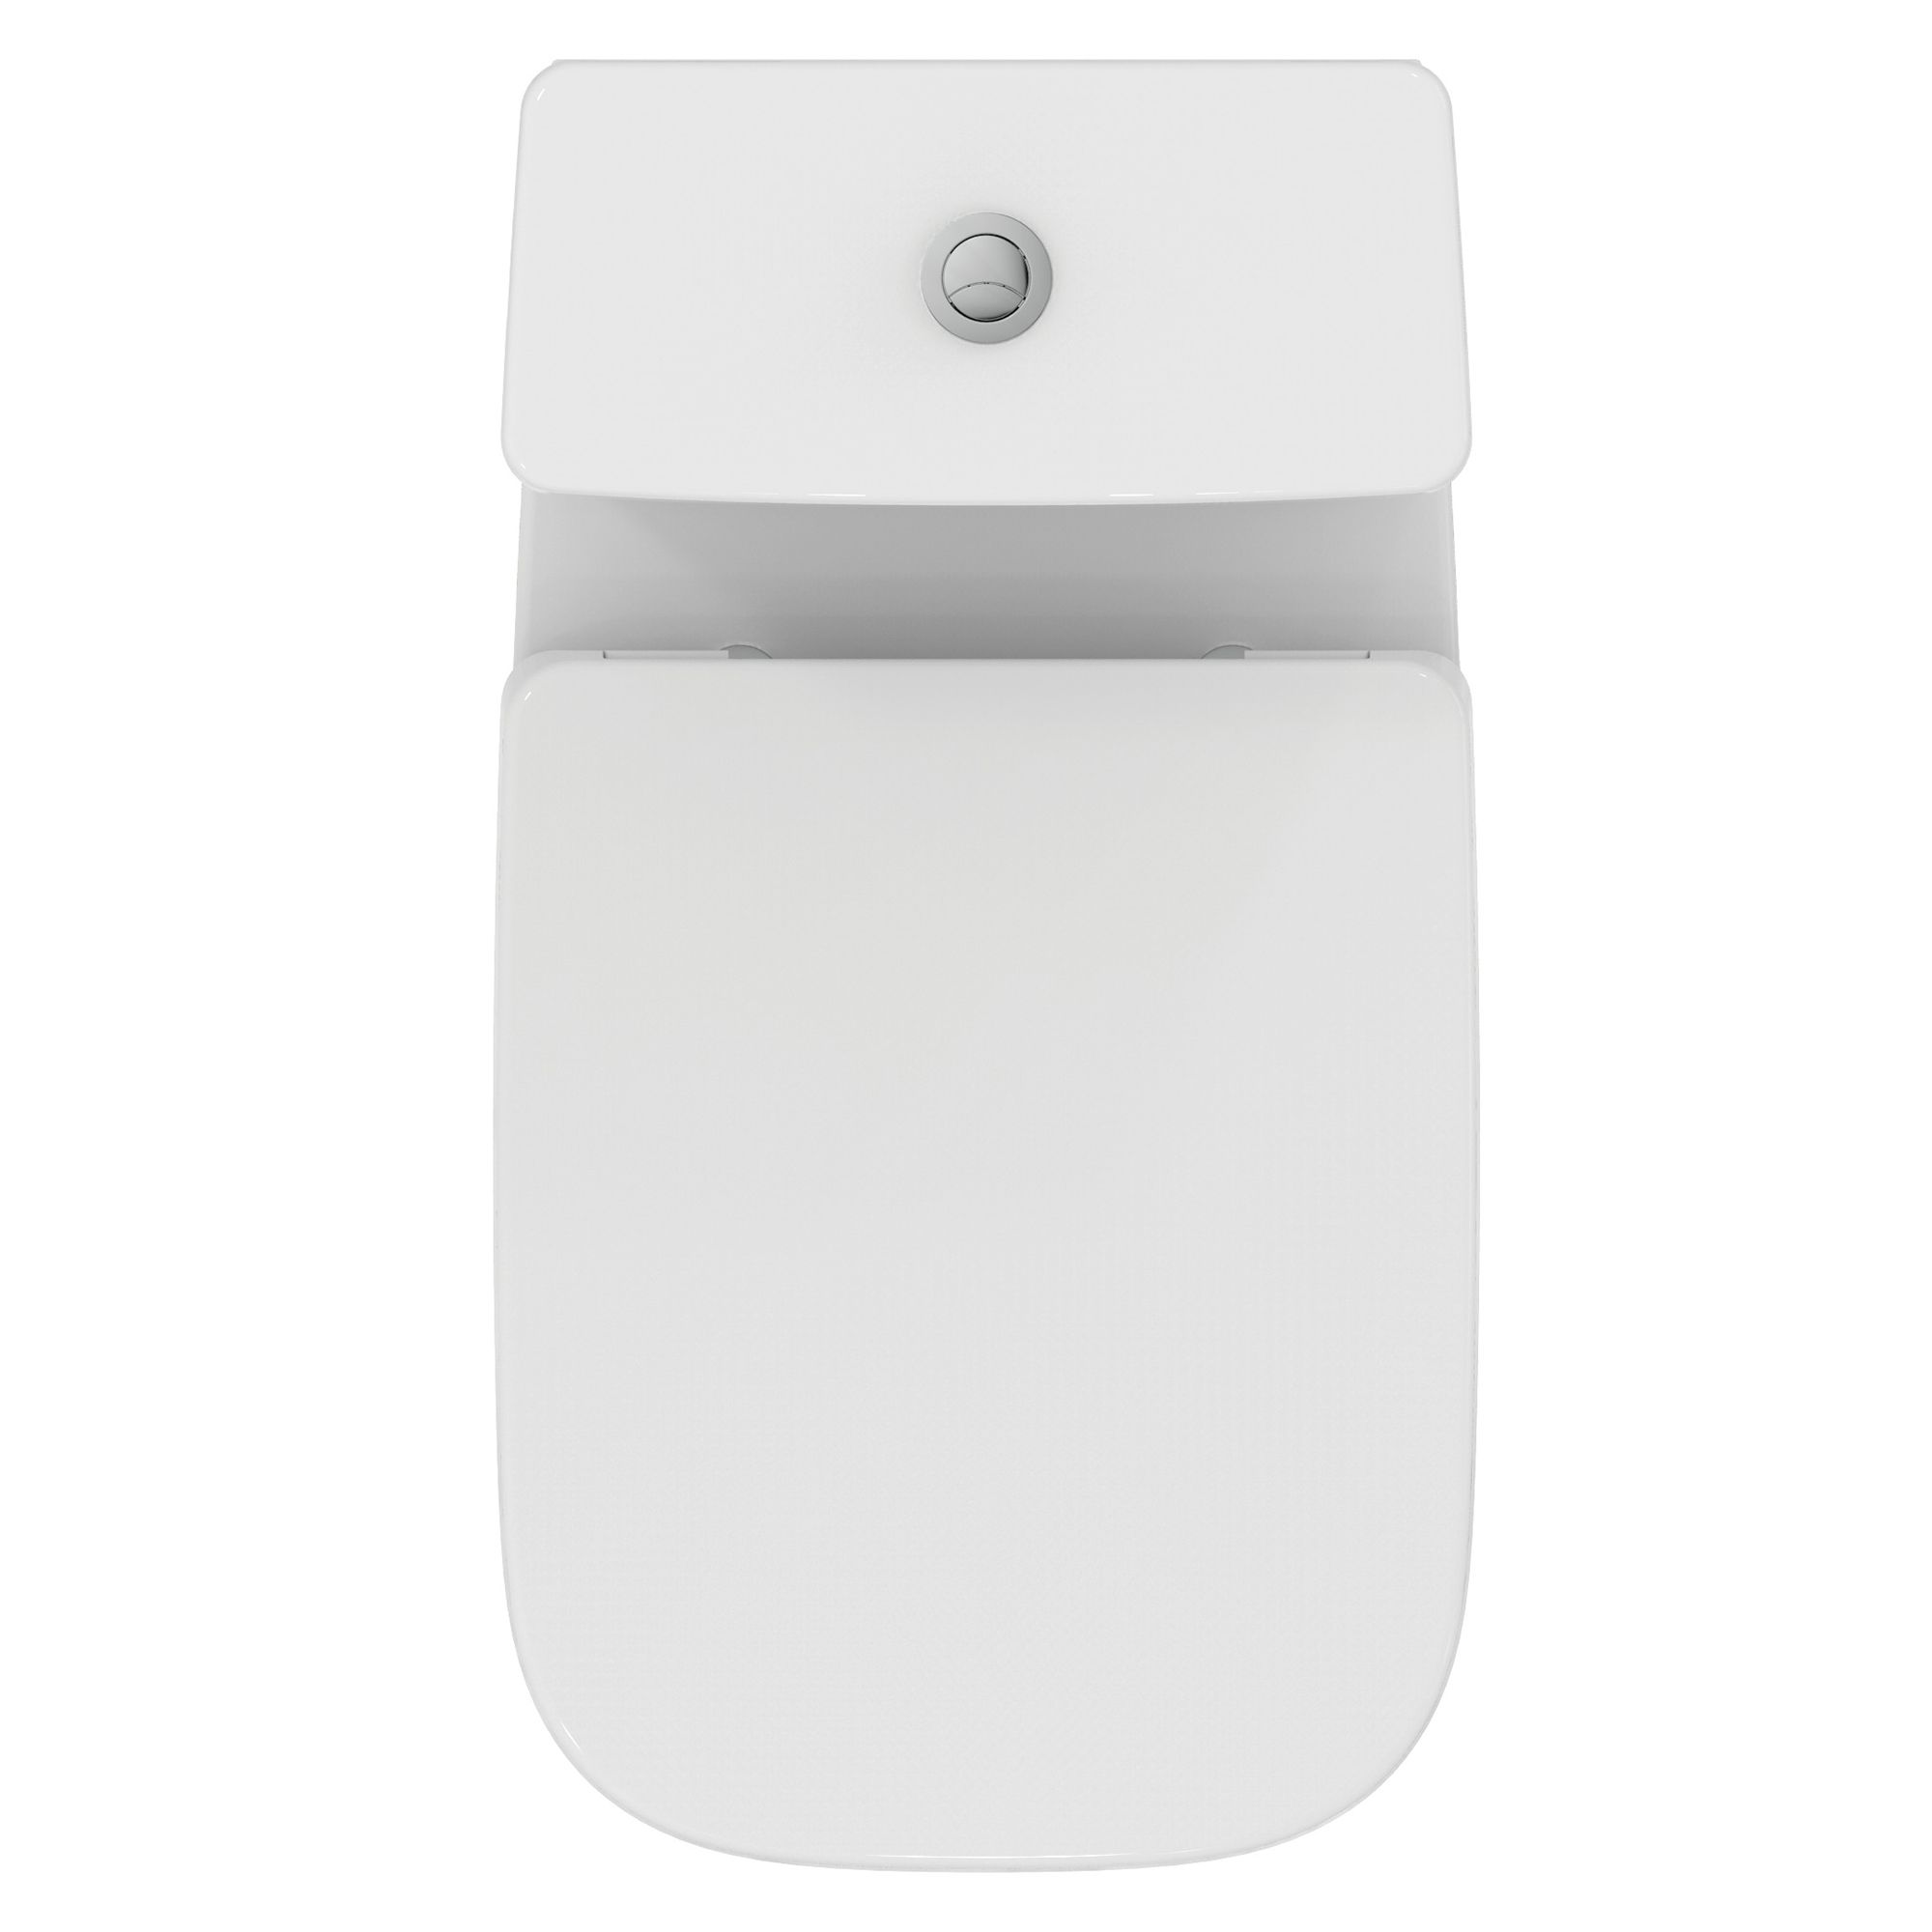 Ideal Standard i.life A White Standard Open back Square Close coupled Toilet set with Soft close seat